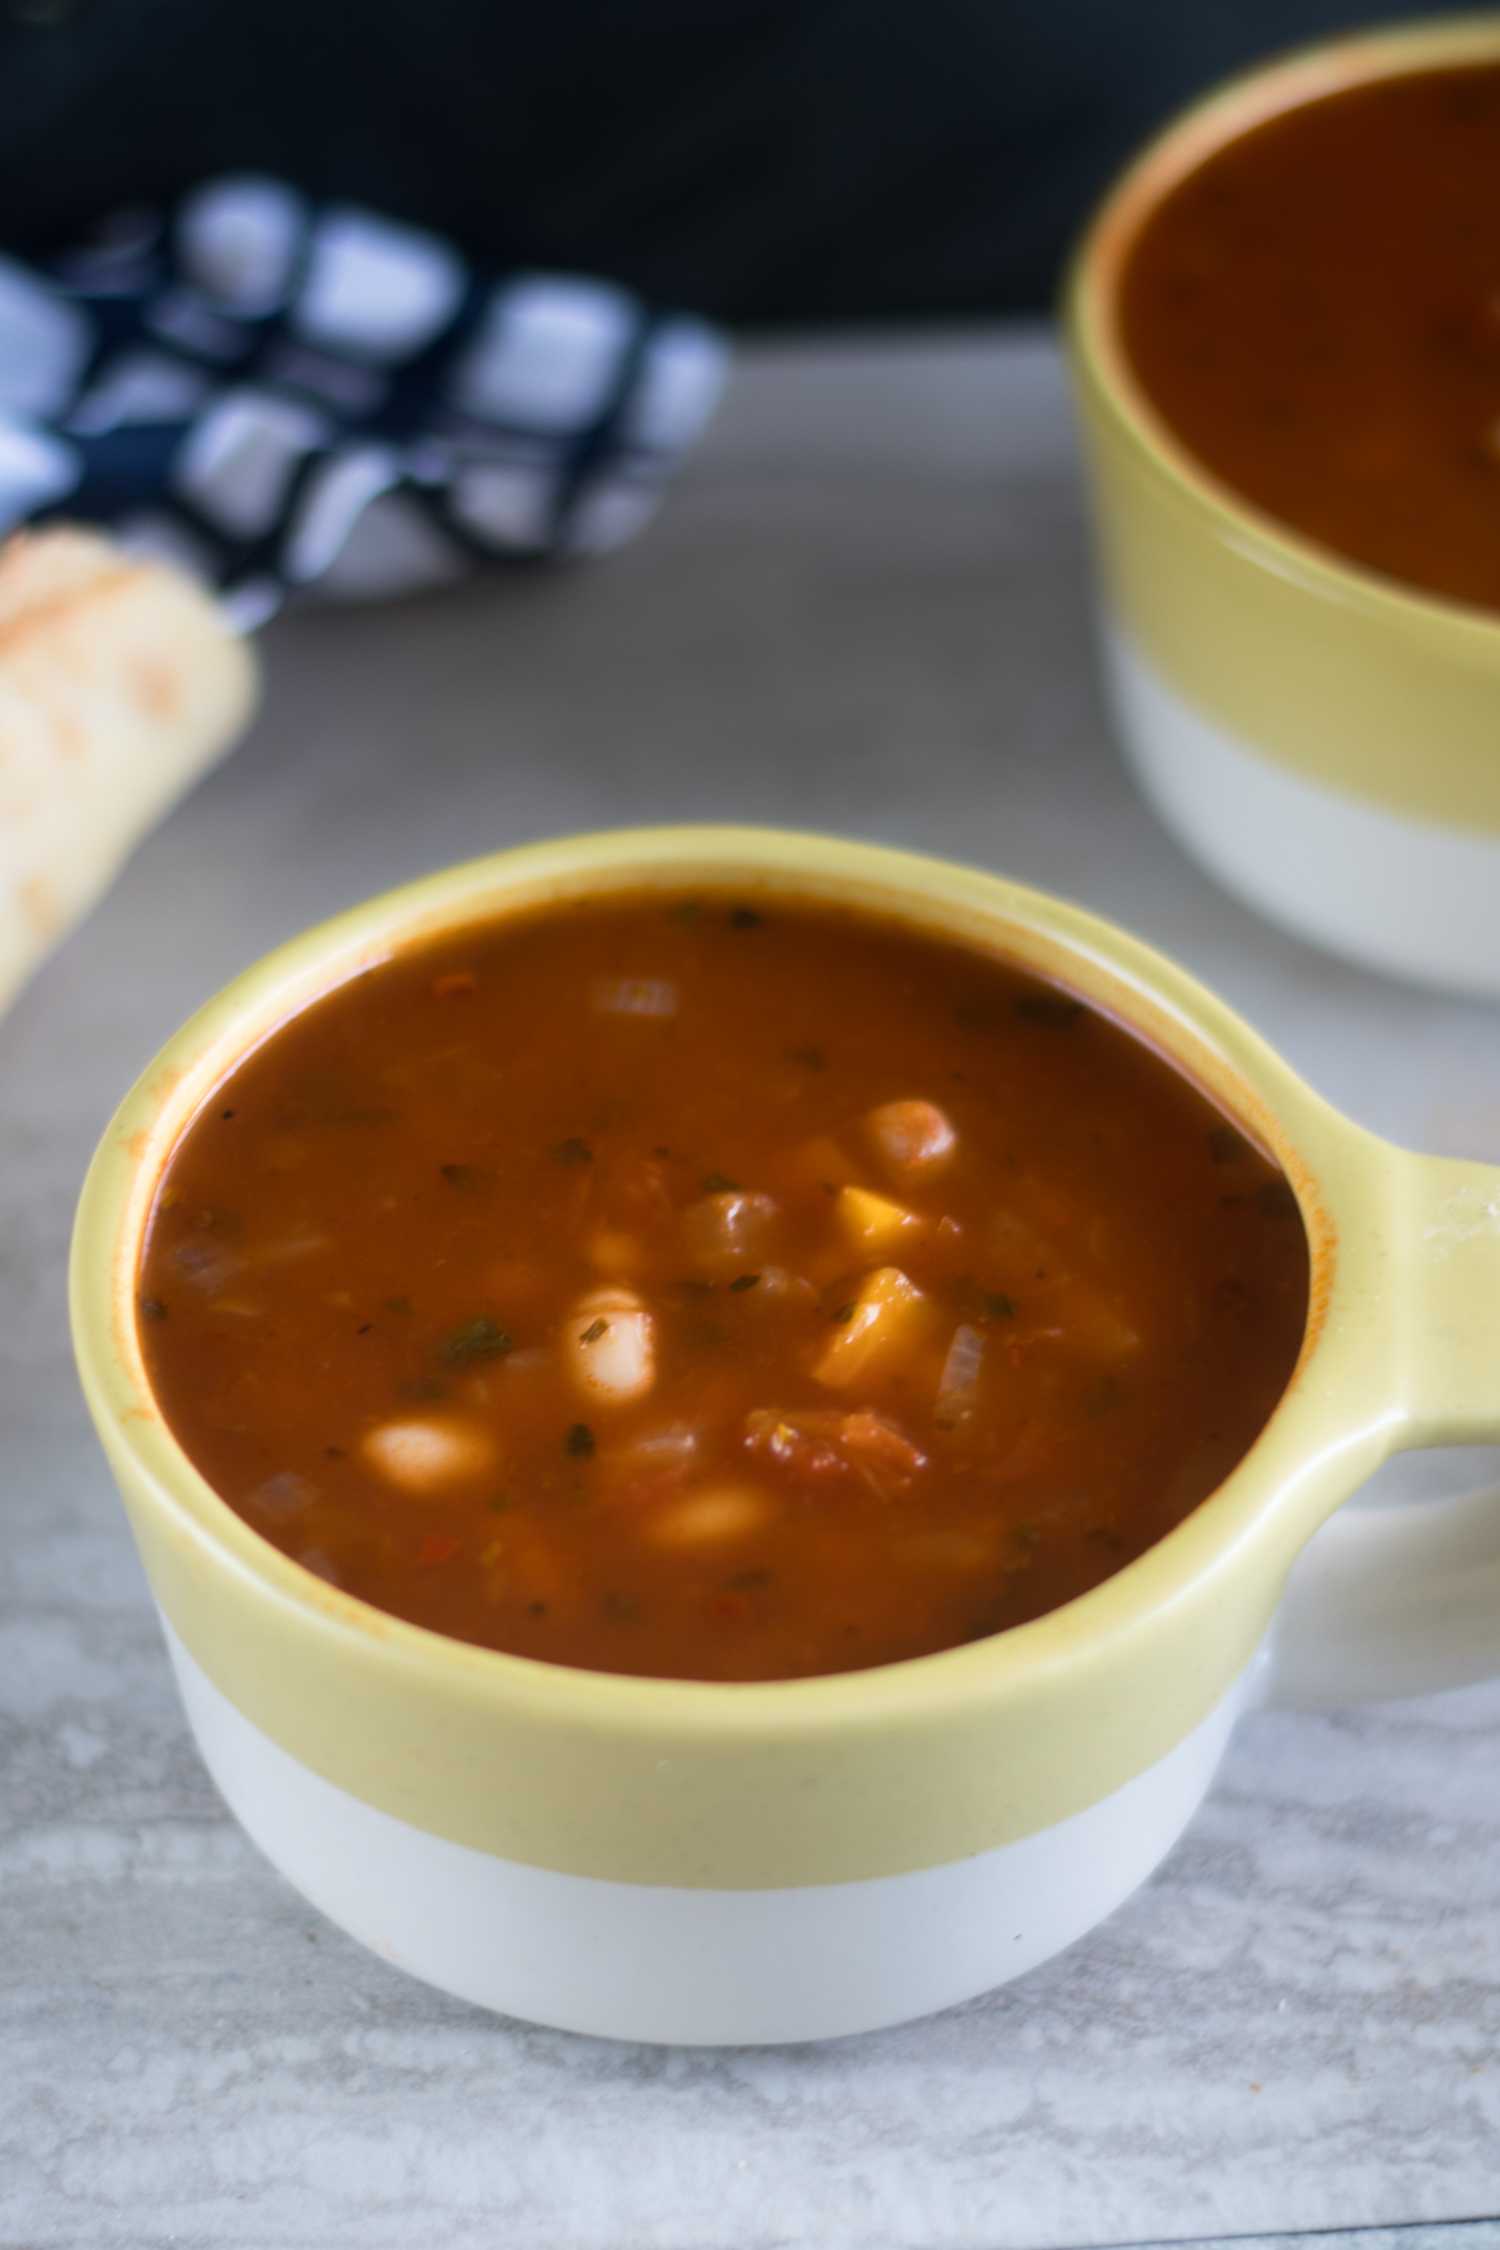 This Easy Tomato and White Bean Soup has a secret ingredient—marinara sauce! Use your favorite marinara sauce. The best part about this soup is that most of the ingredients are pantry staples.